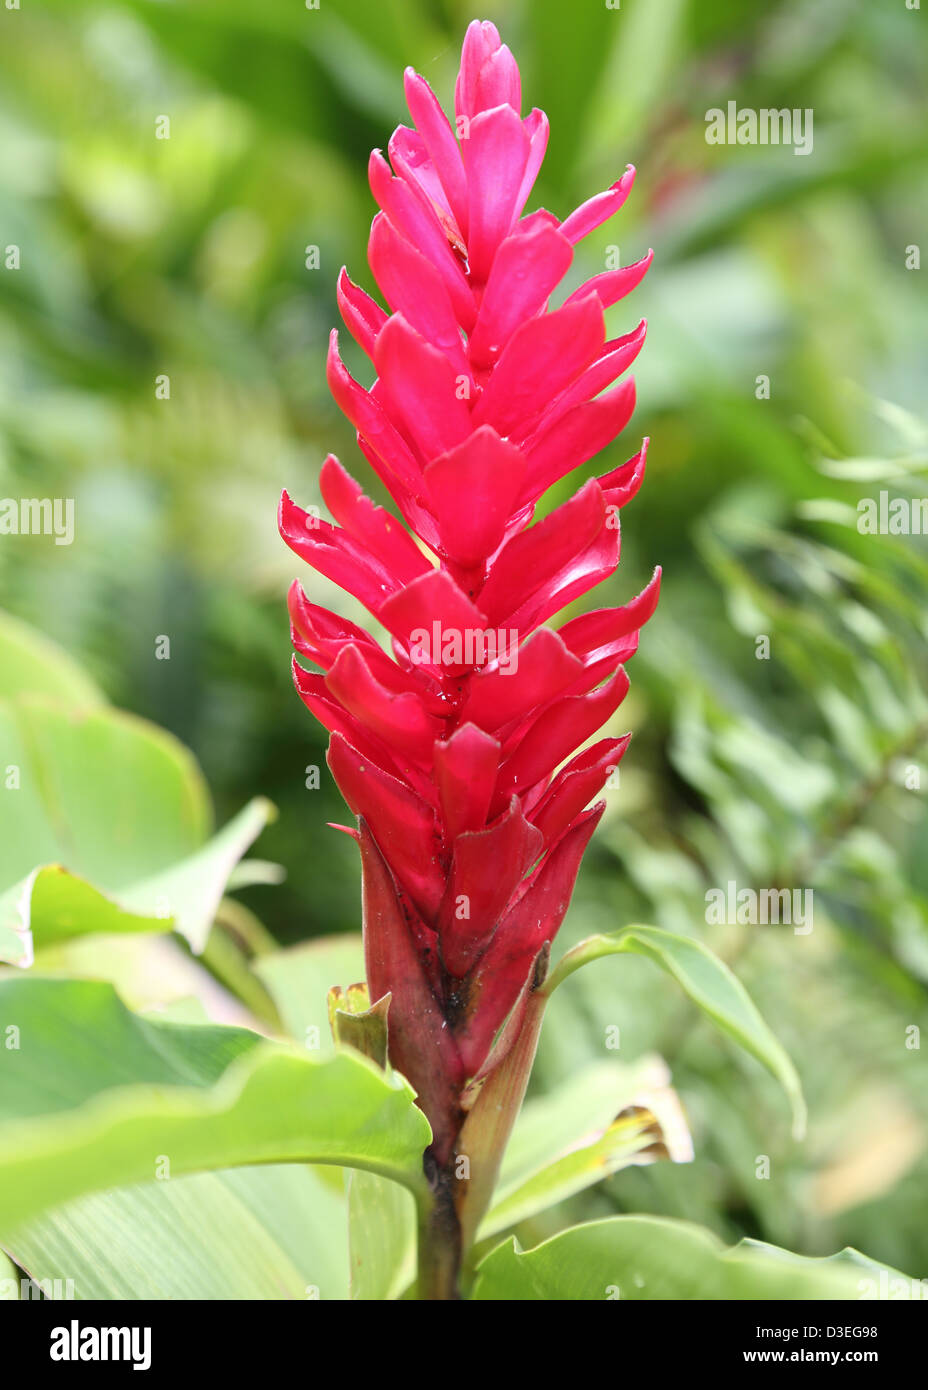 RED GINGER PLANT,BARBADOS Stock Photo